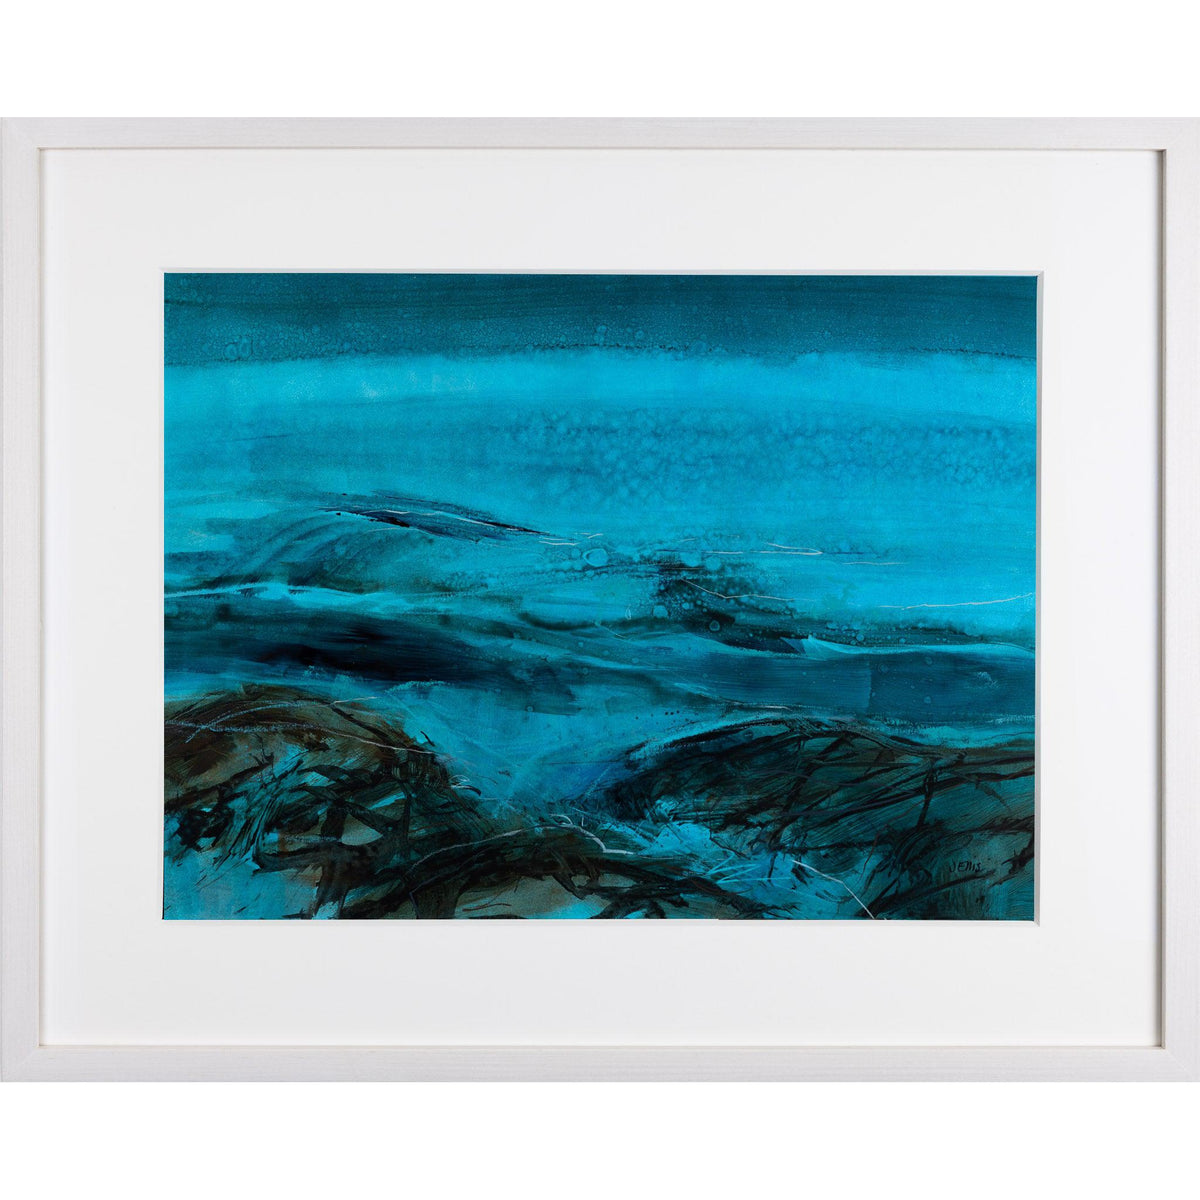 Submerging mixed media original by Jo Ellis, available at Padstow Gallery, Cornwall